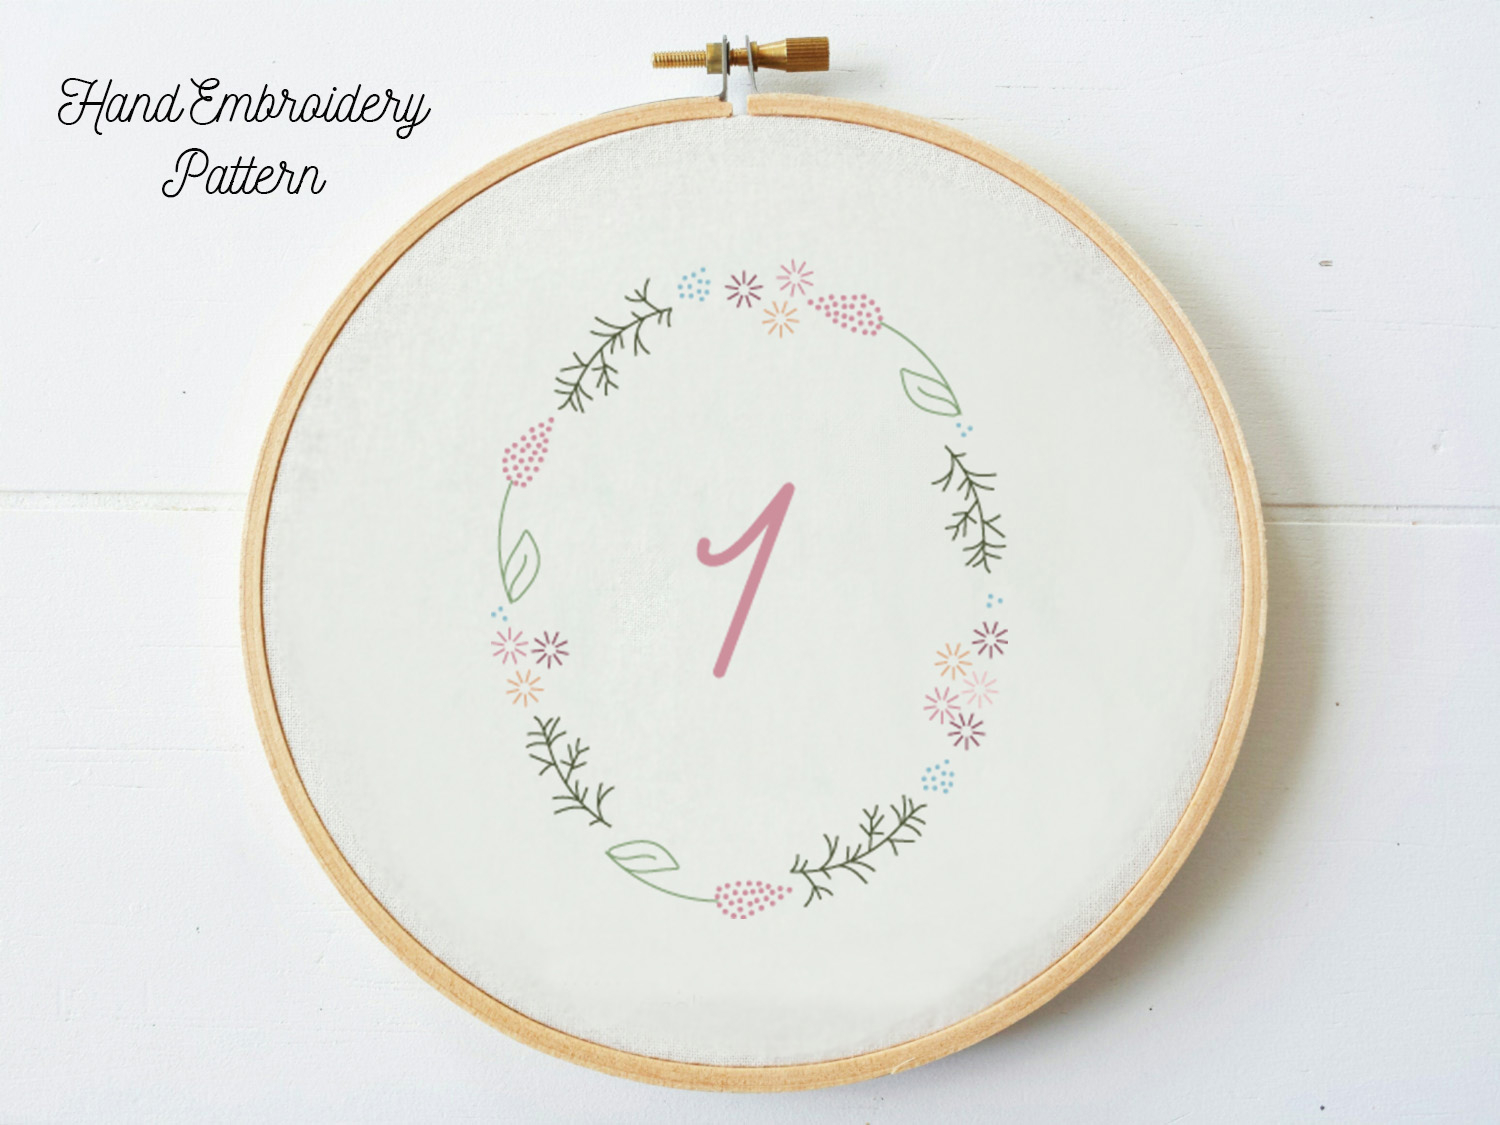 Embroidery Patterns Pdf Bundle 1 10 Numbers In Floral Frame Hand Embroidery Pdf Pattern Instructions